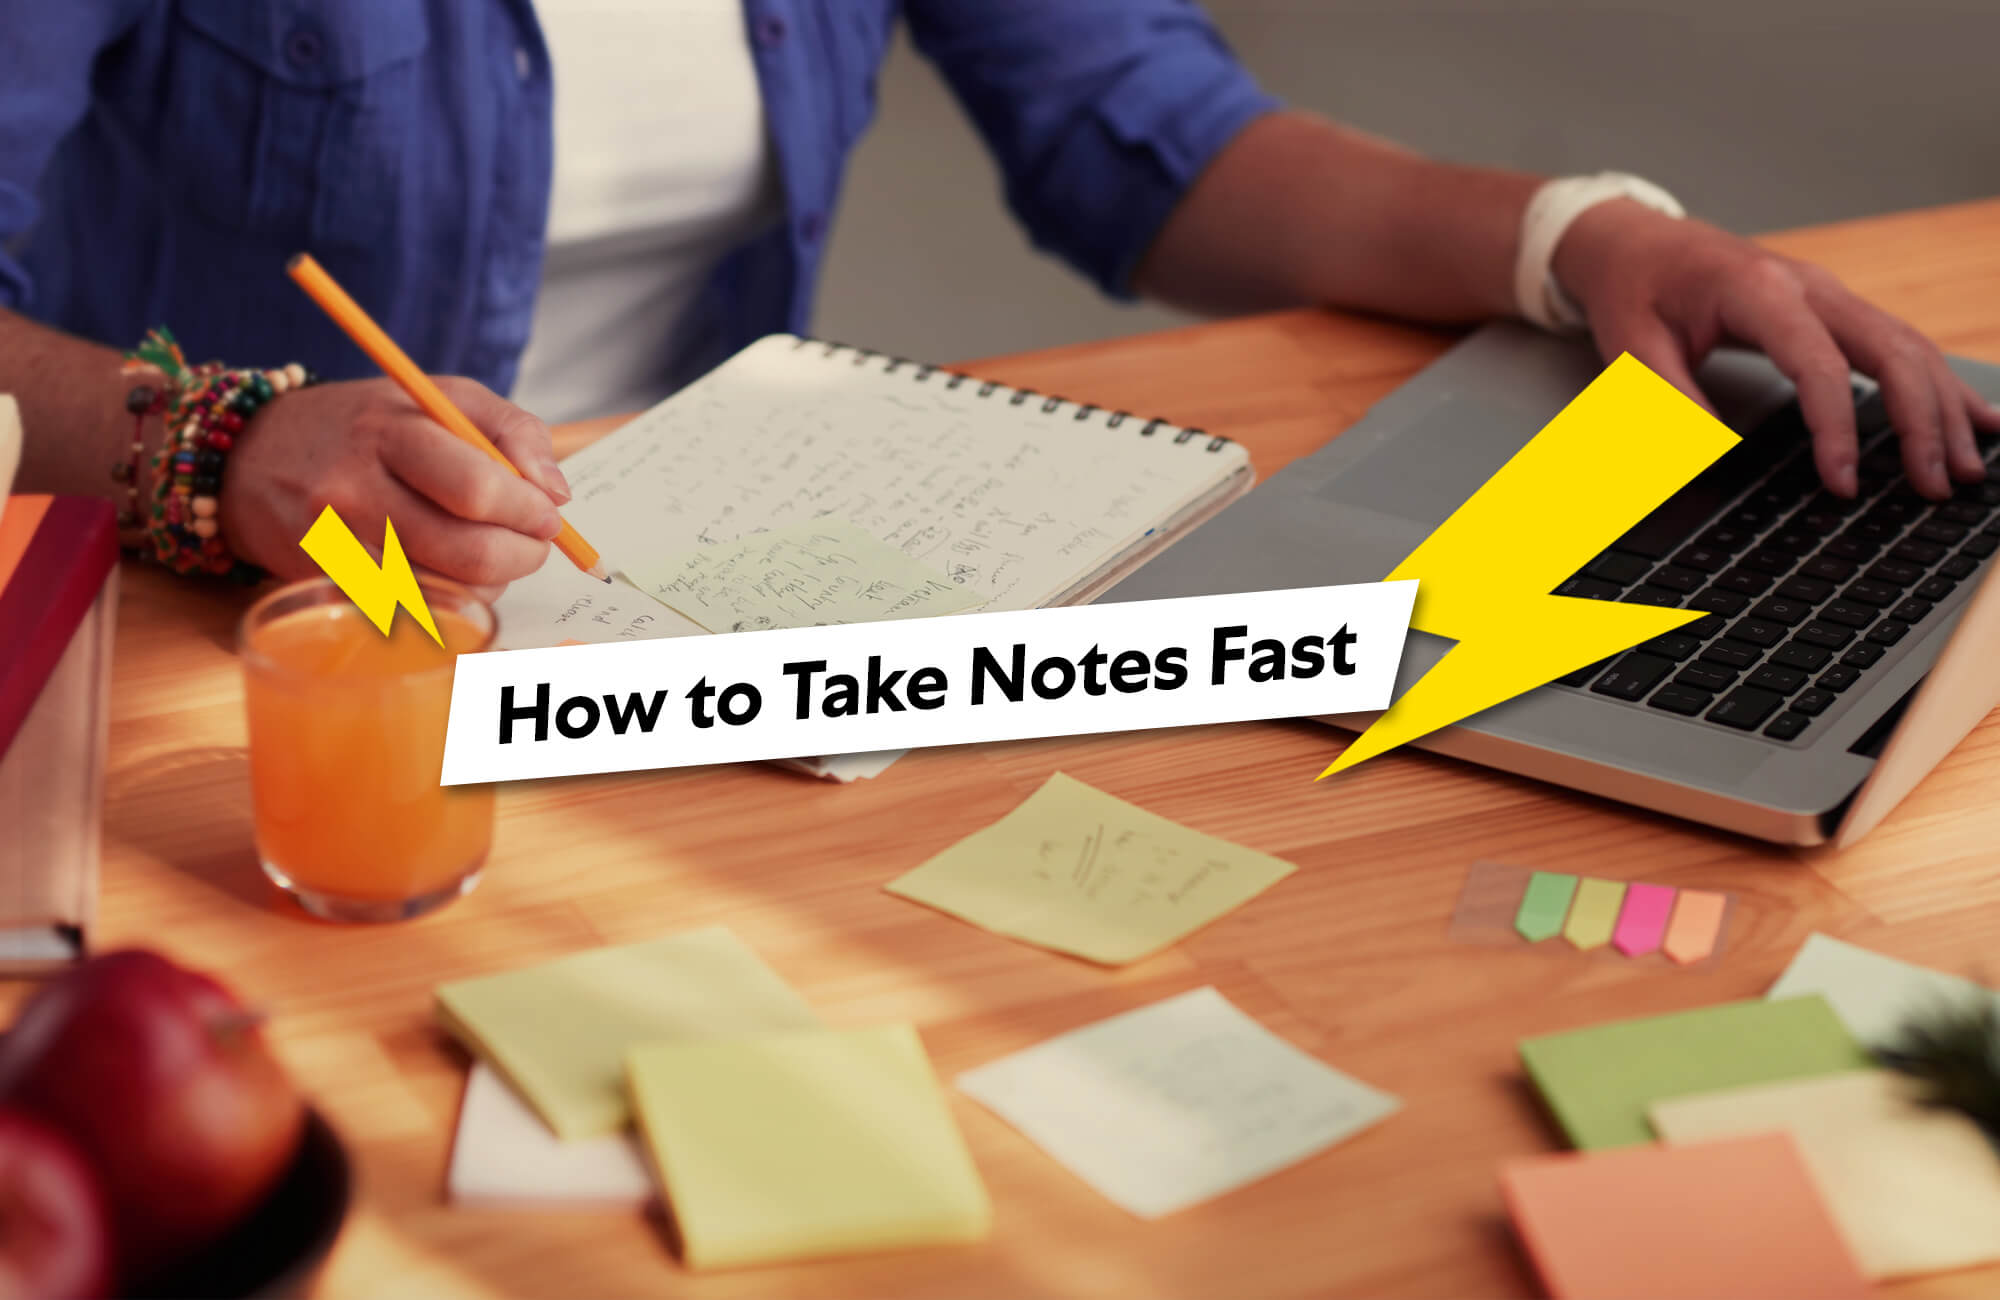 http://paperlike.com/cdn/shop/articles/How-to-Take-Notes-Fast.jpg?v=1601299861&width=2048